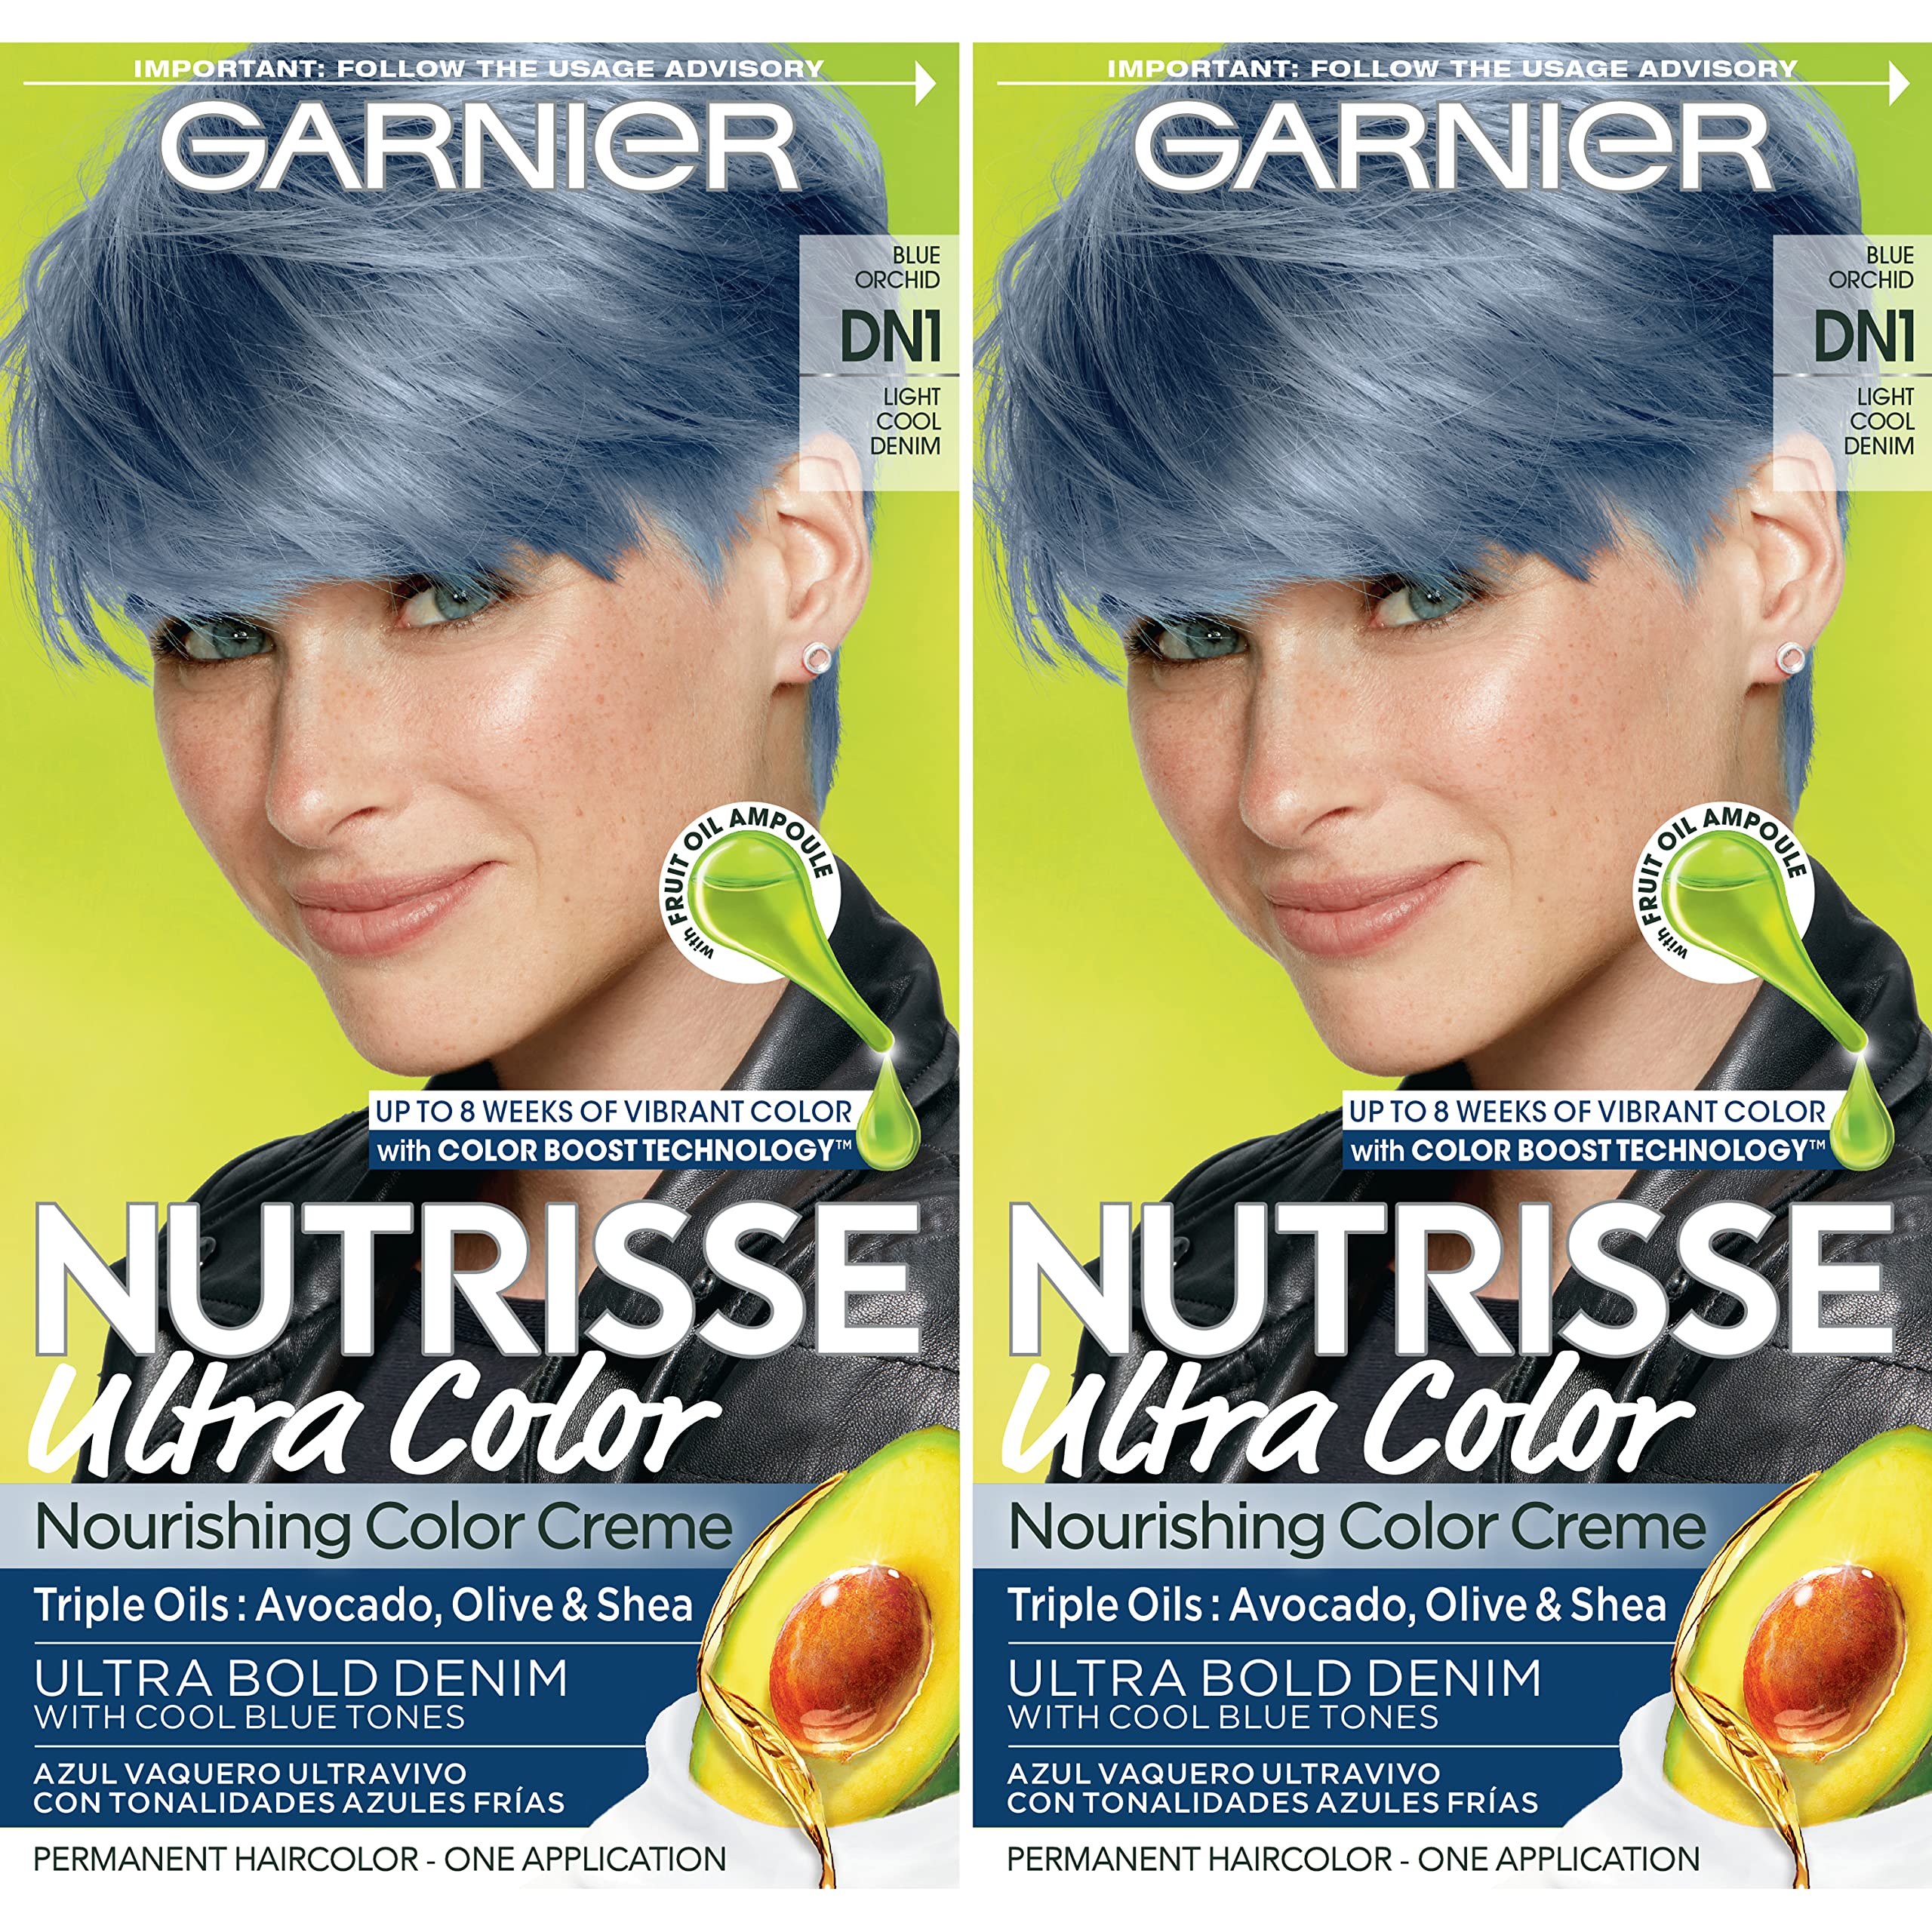 May (Packaging Creme (Blue Color Count Cool Nourishing Nutrisse Vary) Ultra Orchid) 2 Light Permanent Hair Denim Dye DN1 Hair Color Garnier